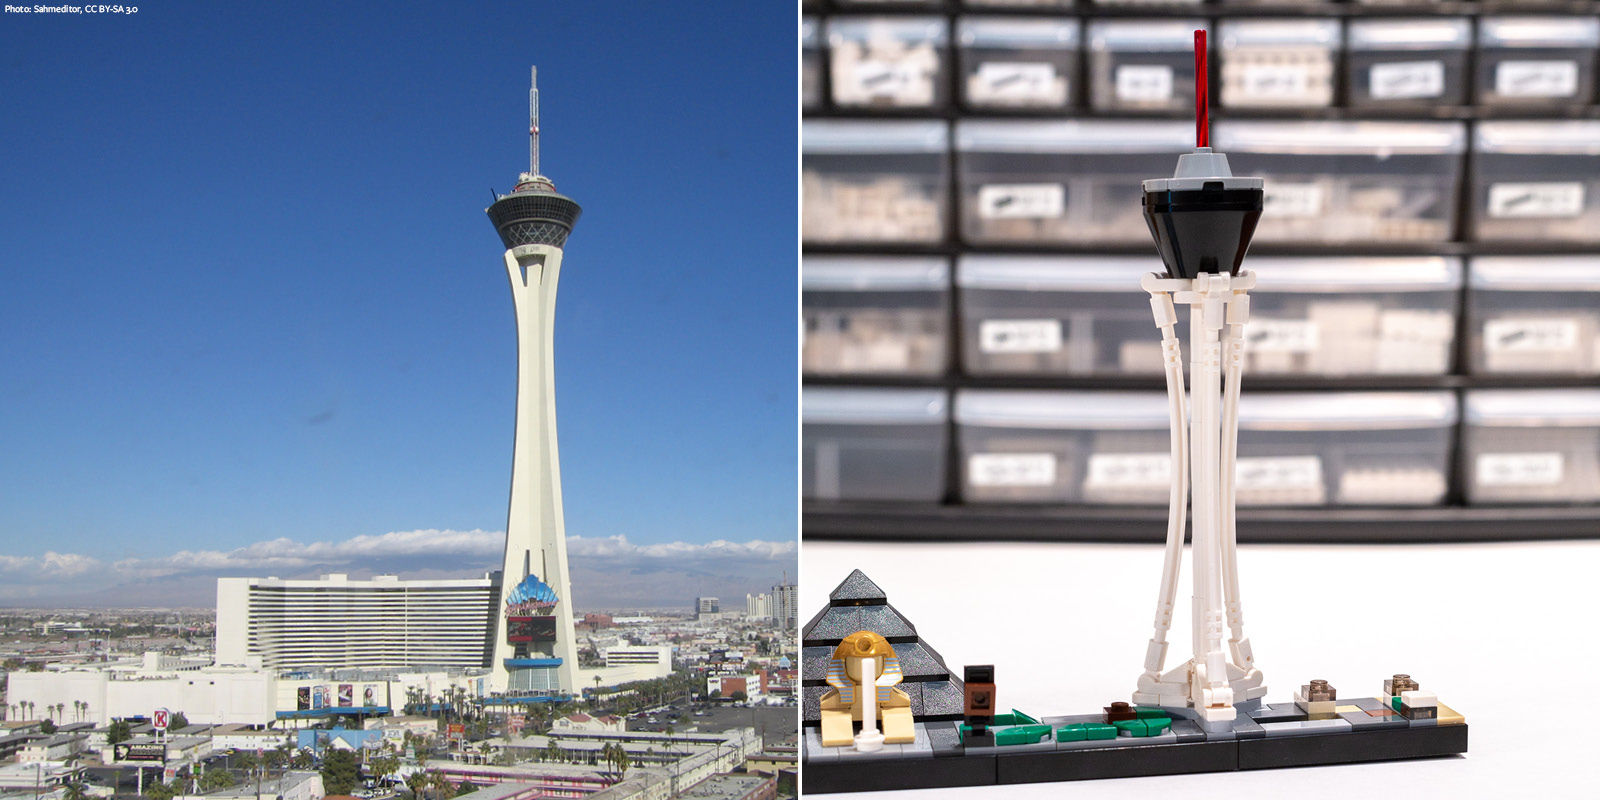 Geographically correct Lego Las Vegas with the High Roller. : r/vegaslocals